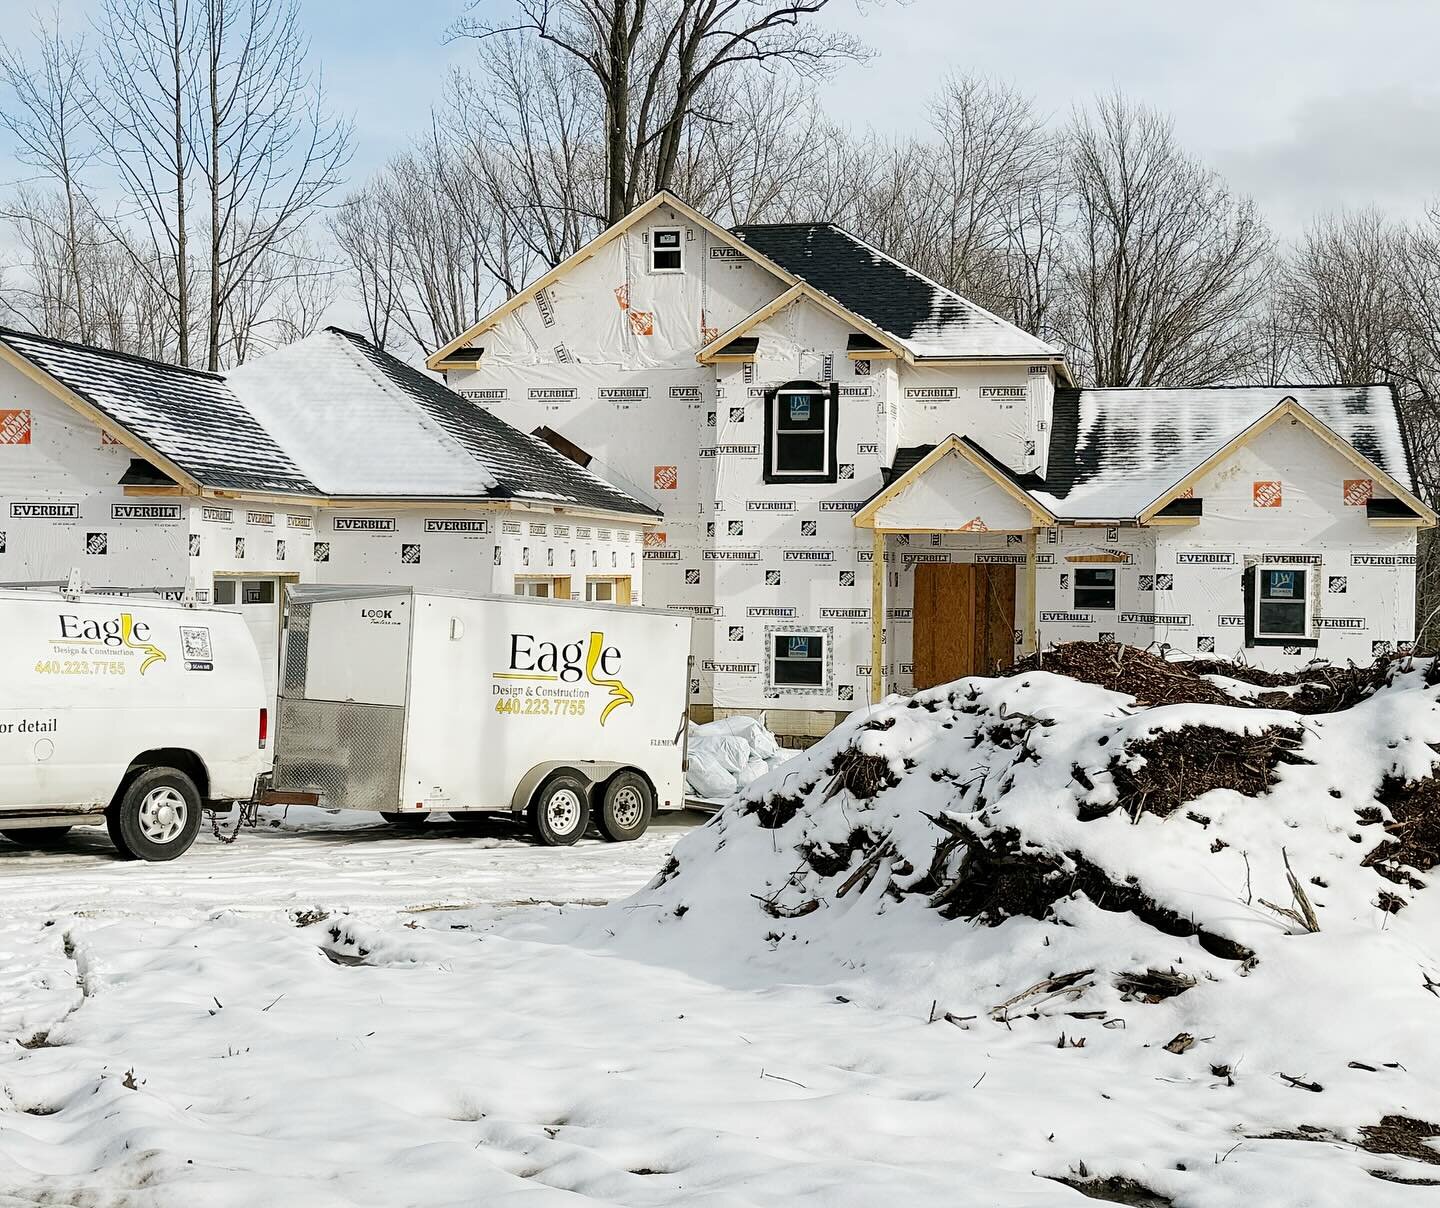 Are you ready to embark on the journey of crafting your dream home with Eagle Design and Construction? Elevate your experience with our customer-focused service, premium materials, and unparalleled craftsmanship. Call us at 440-223-7755 and let&rsquo